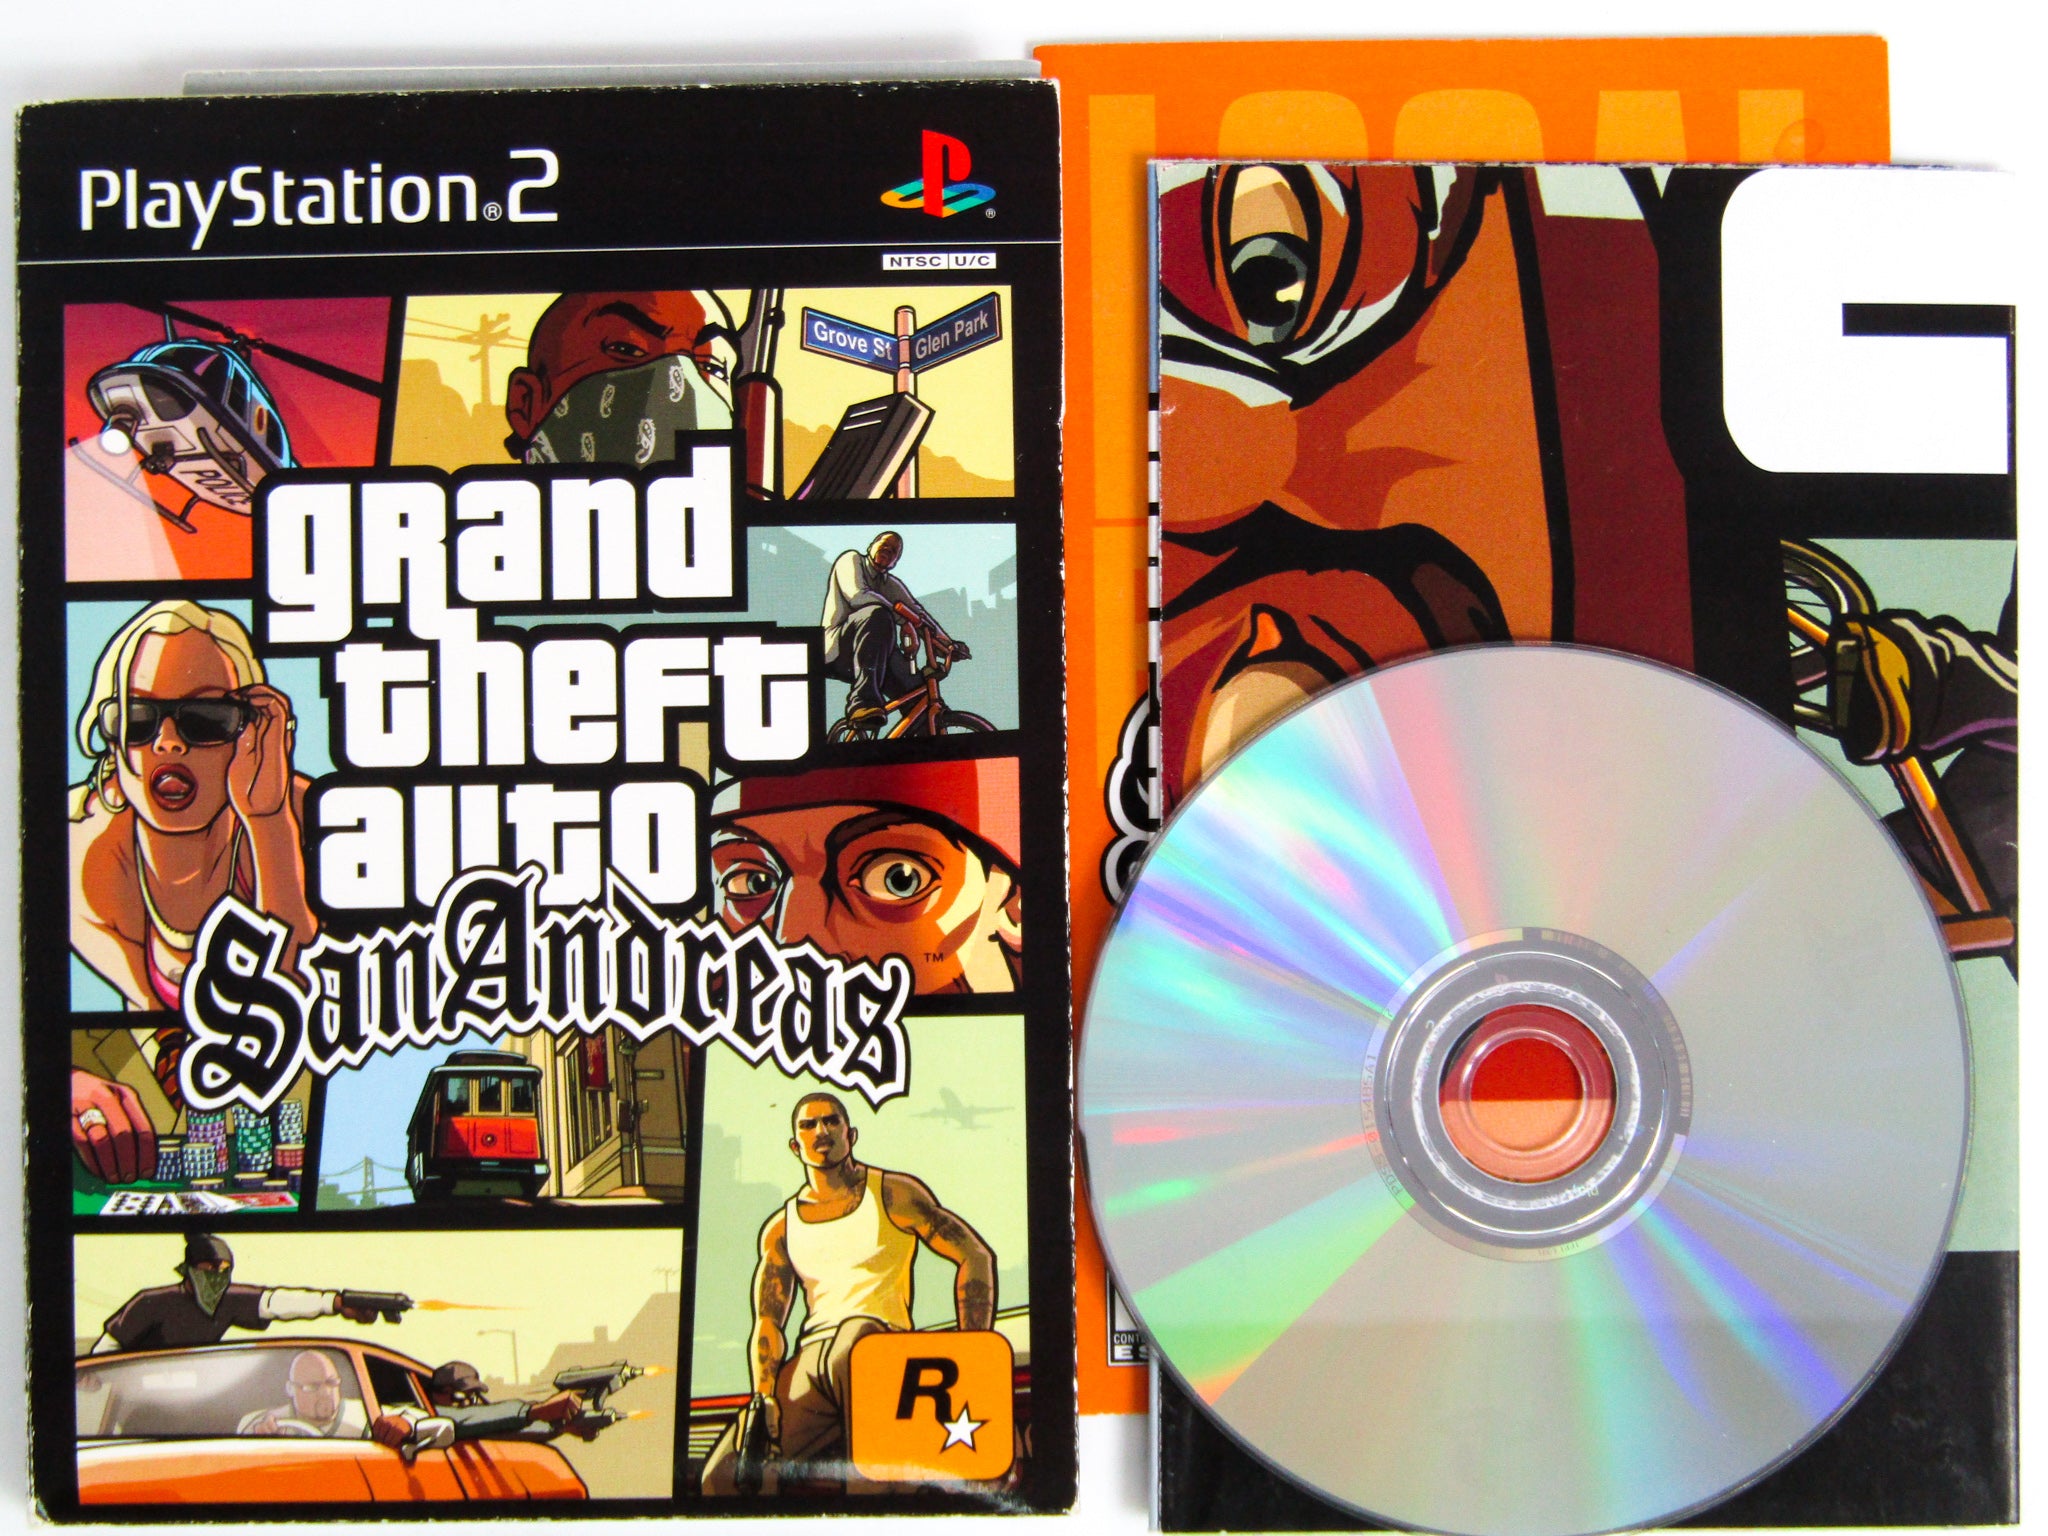 Grand Theft Auto: San Andreas Special Edition (PlayStation 2, PS2